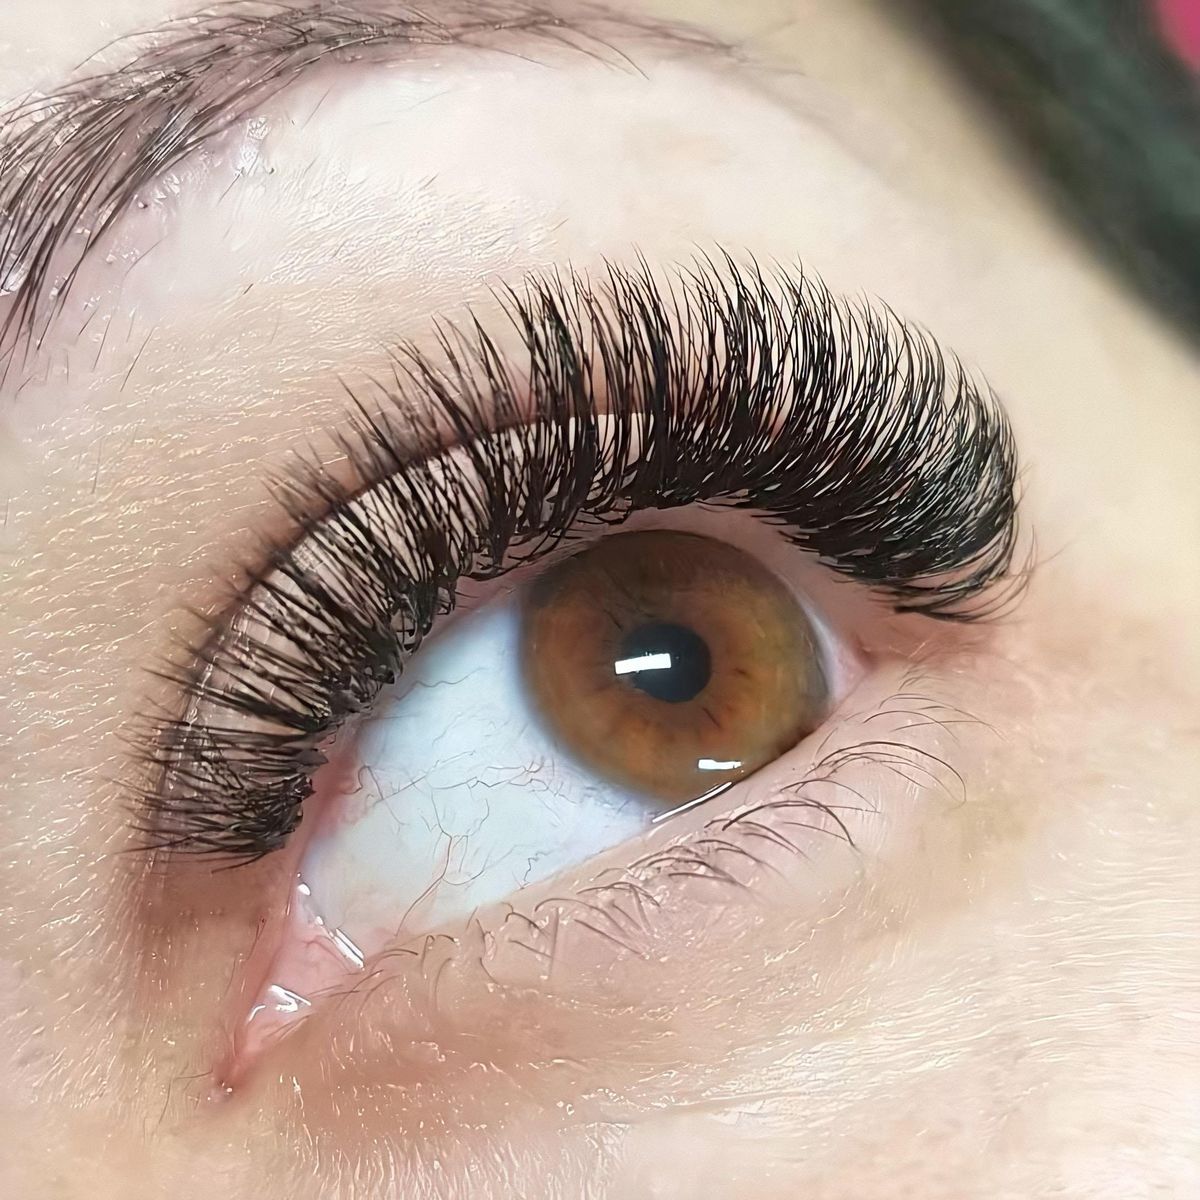 \u2605 Eyelash Extensions Certified Training (EARLY SALE) IG - @CREATIVEMAKEOVER